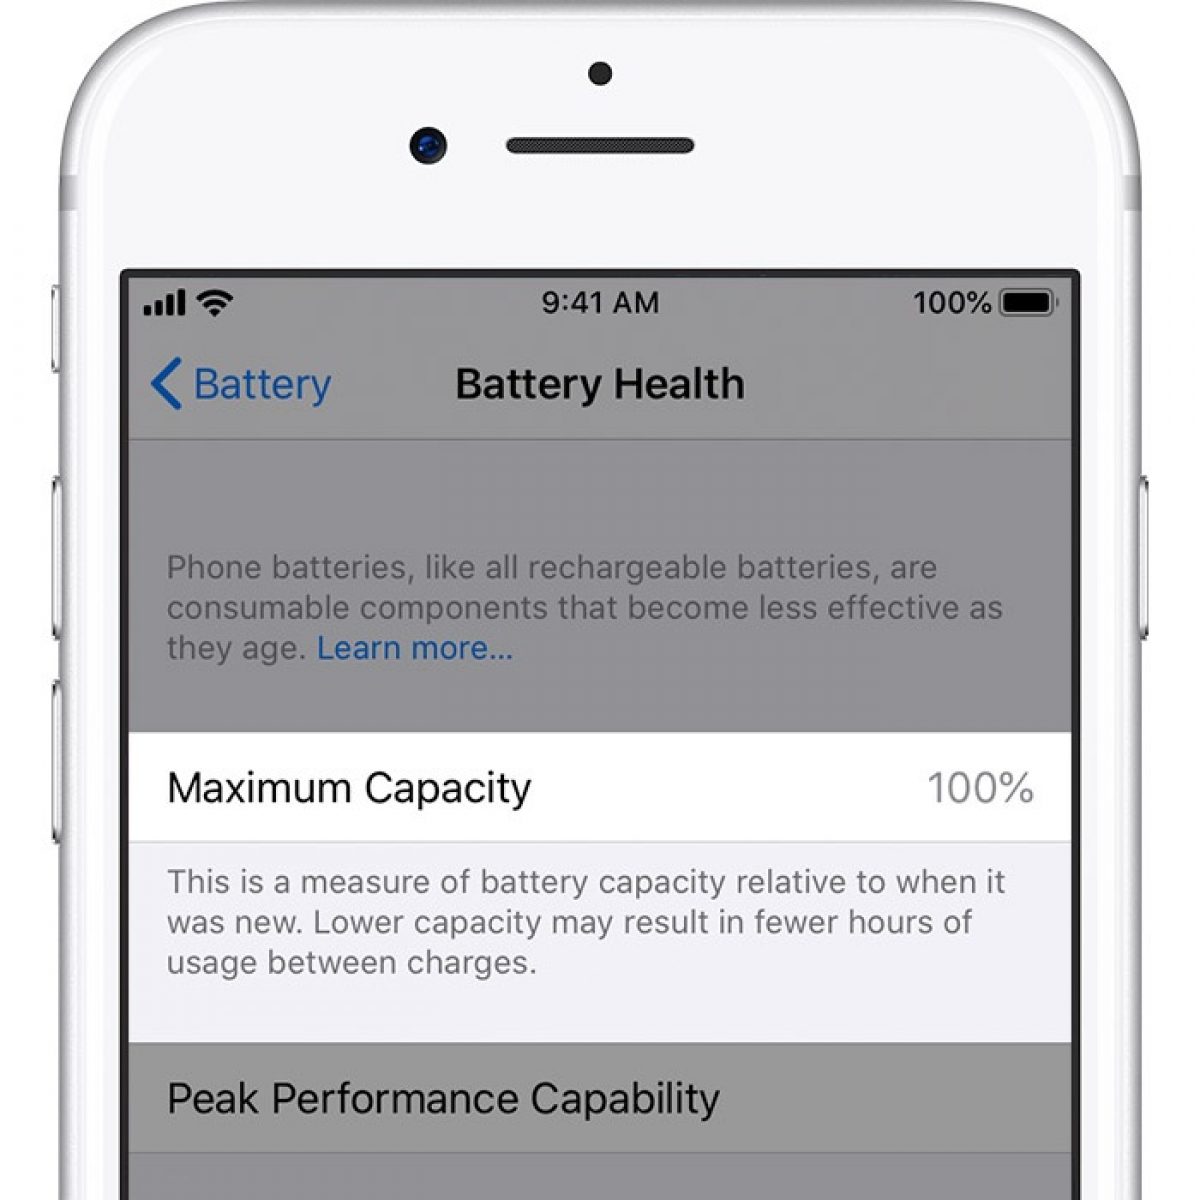 iphones-will-not-let-you-check-battery-health-status-after-third-party-battery-repairs